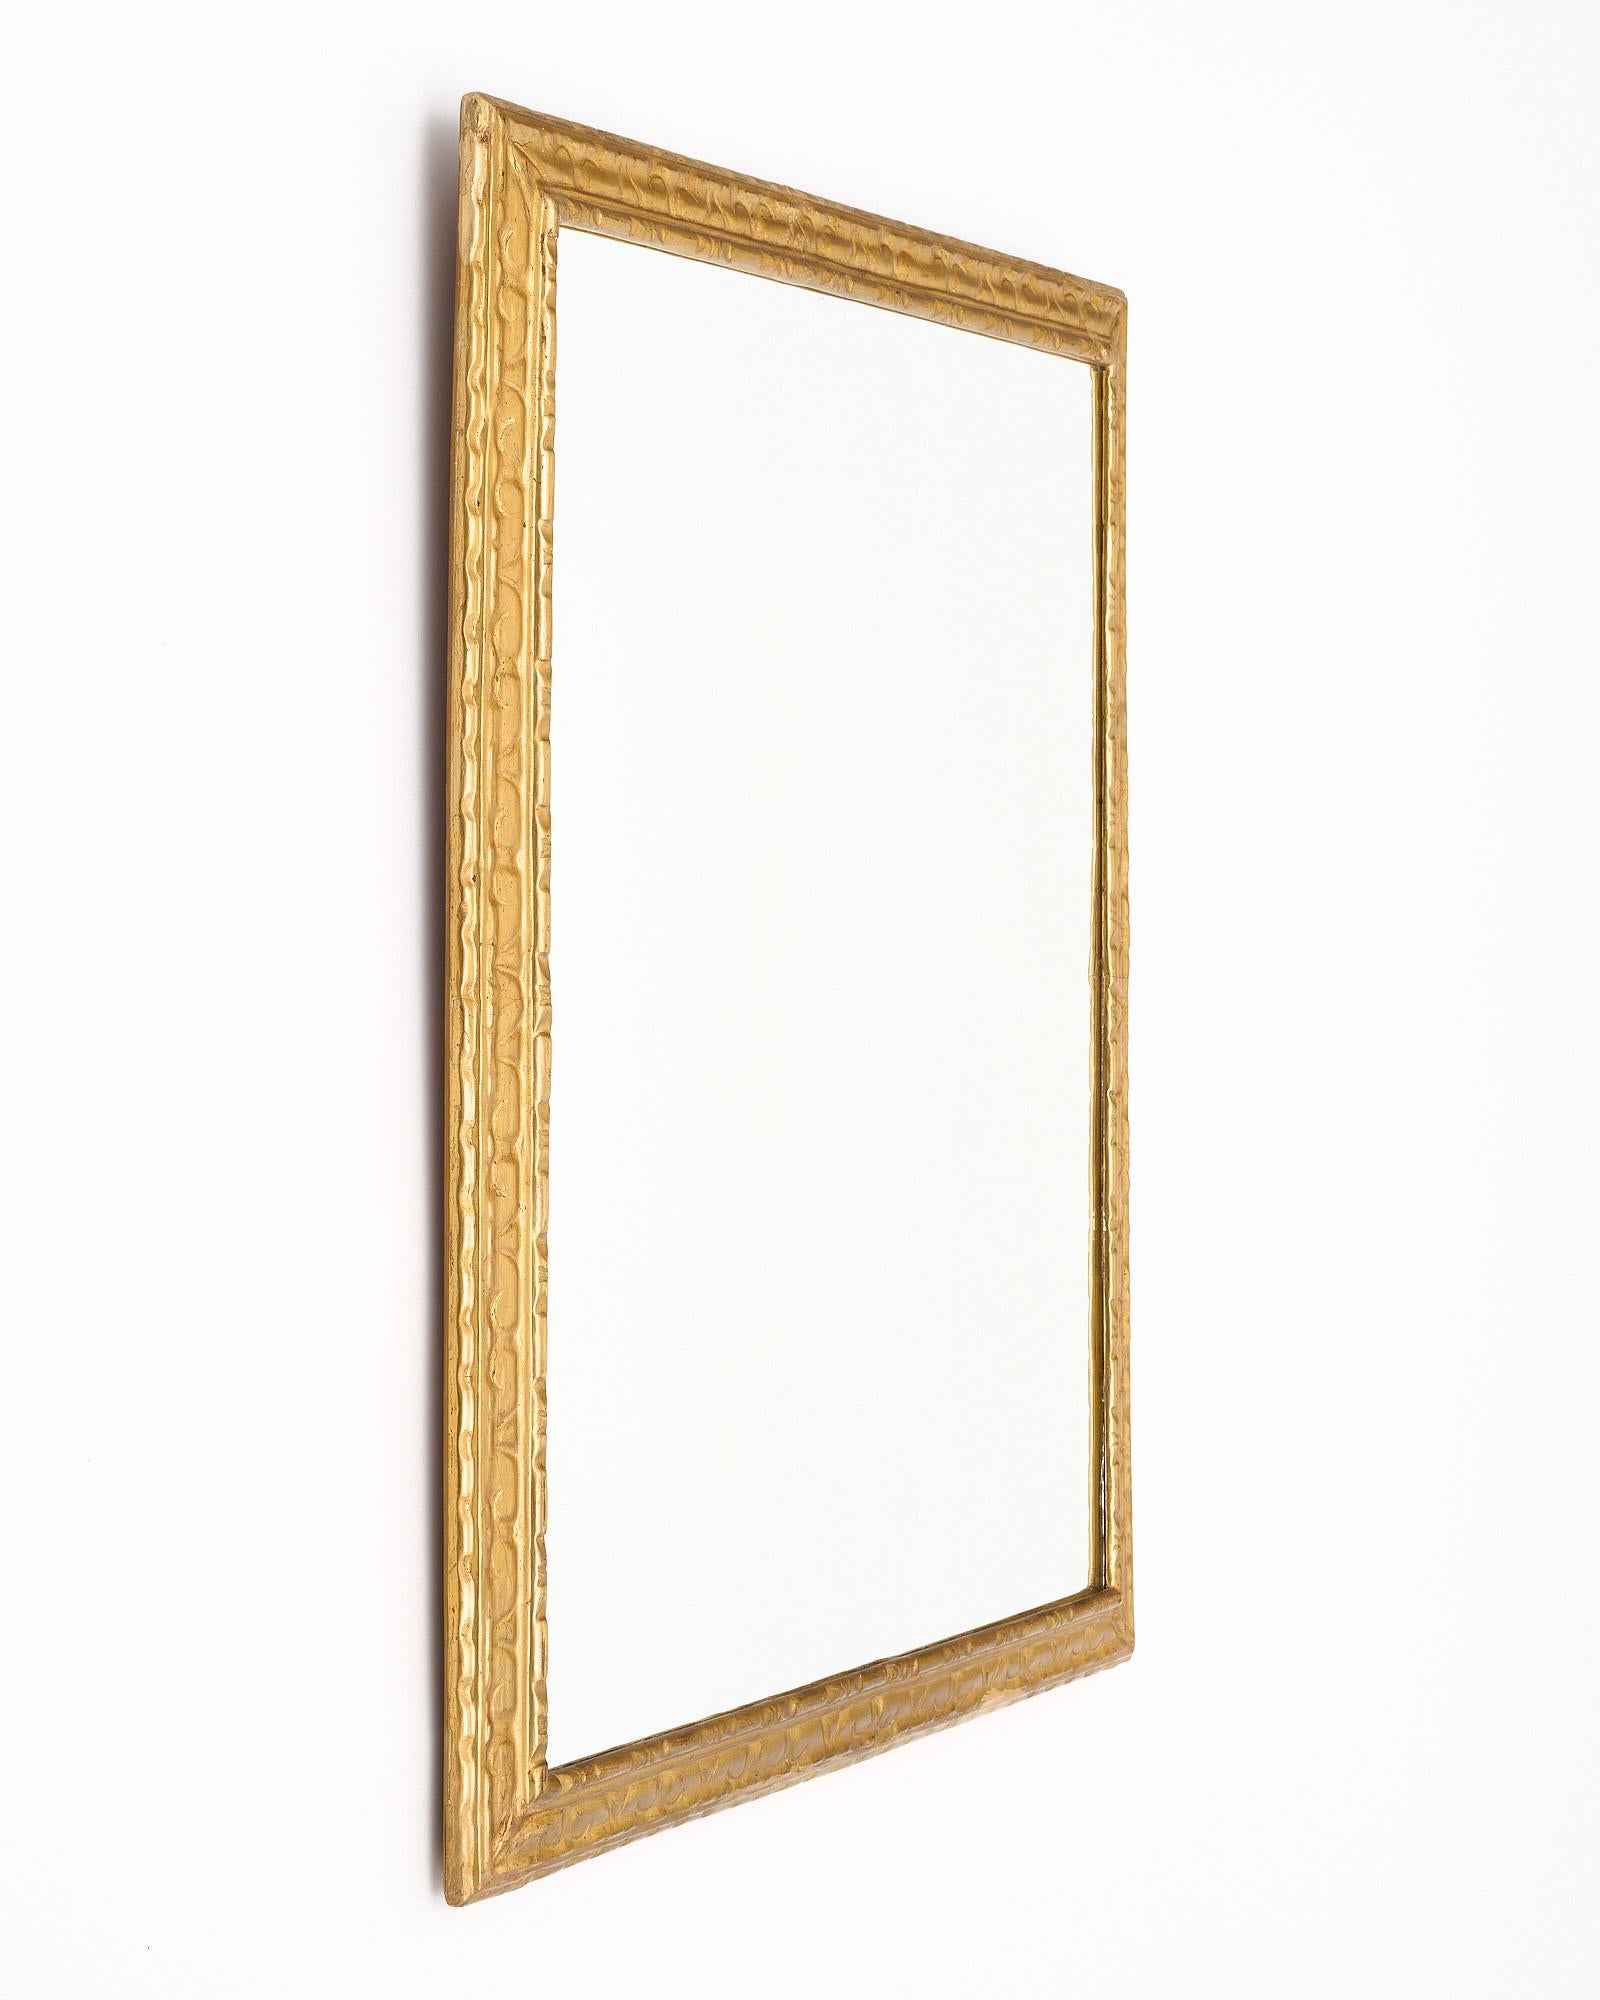 Pair of antique mirrors from Spain. 23 carats gold leafed frames. Each features a finely hand-carved pattern to the wood.
